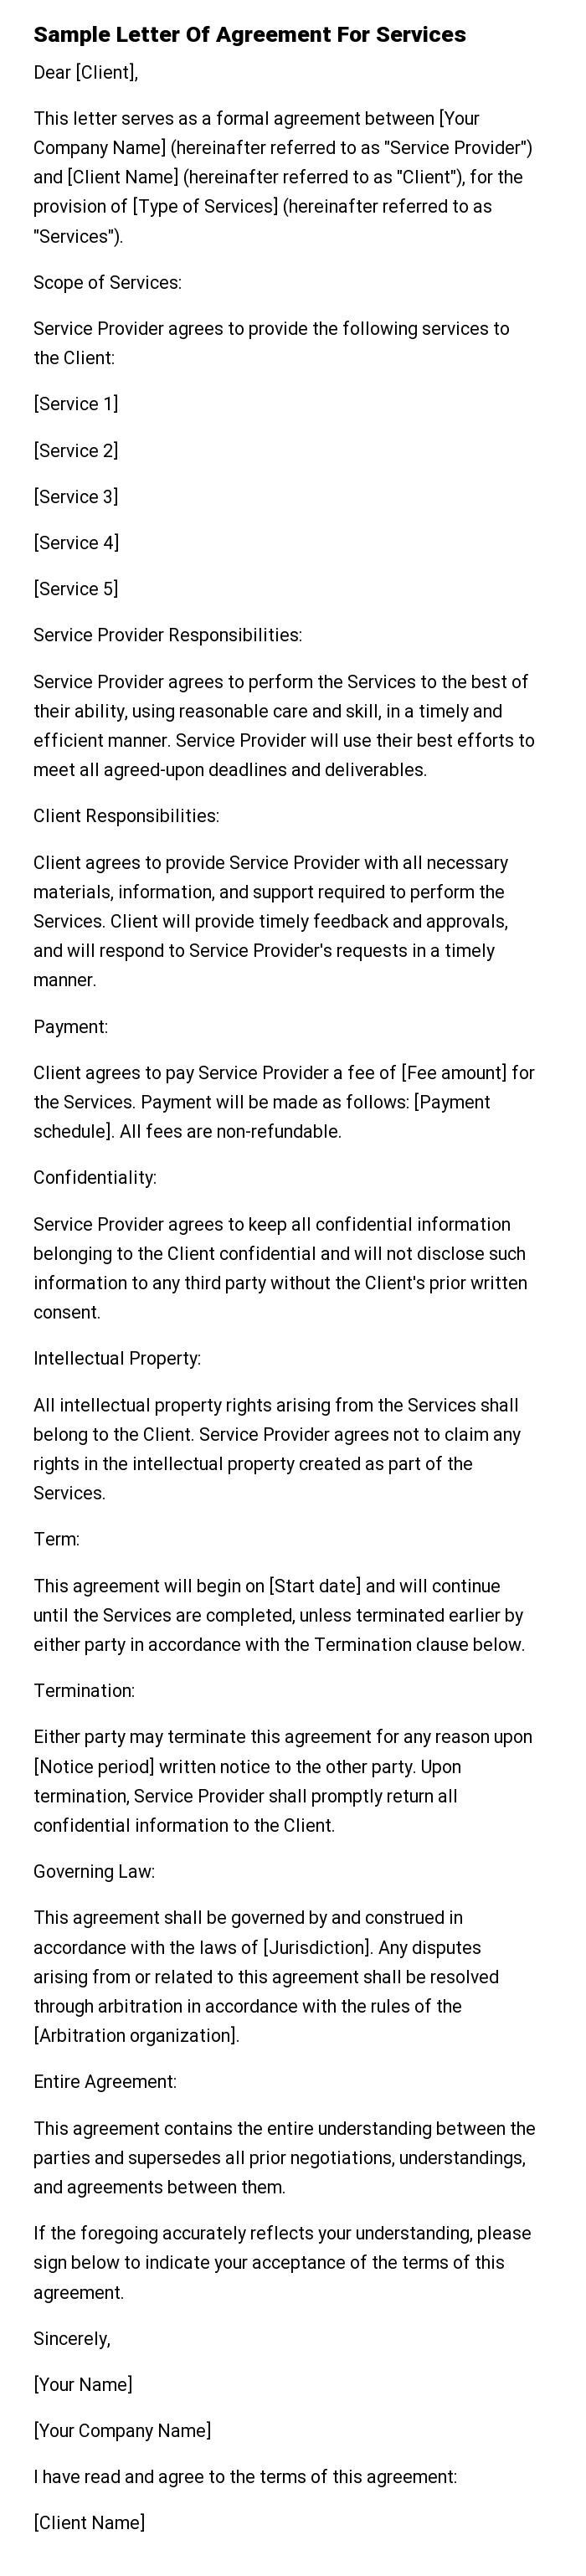 Sample Letter Of Agreement For Services